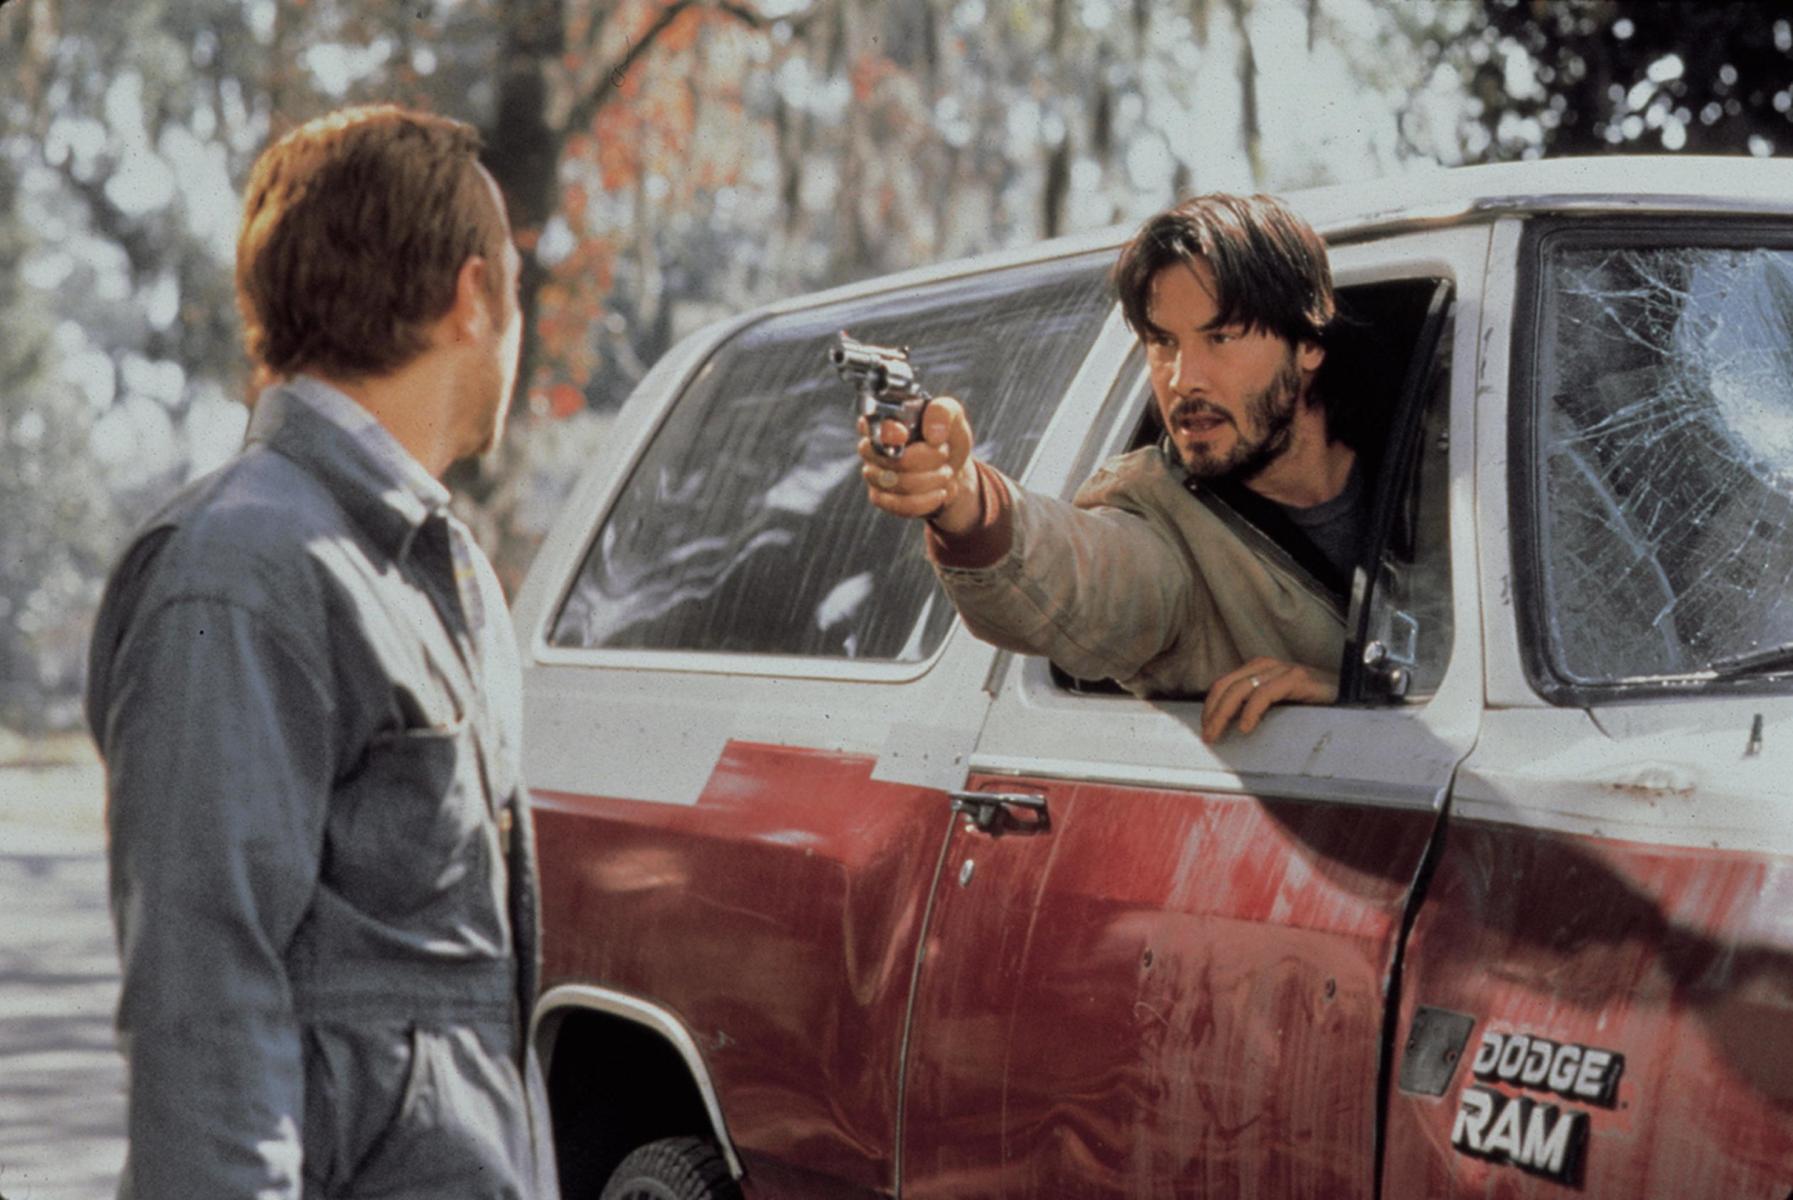 A bearded Keanu Reeves points a revolver at a man in The Gift. Reeves is sitting in the passenger seat of a white and red Dodge Ram, with his head and arm out of the window.